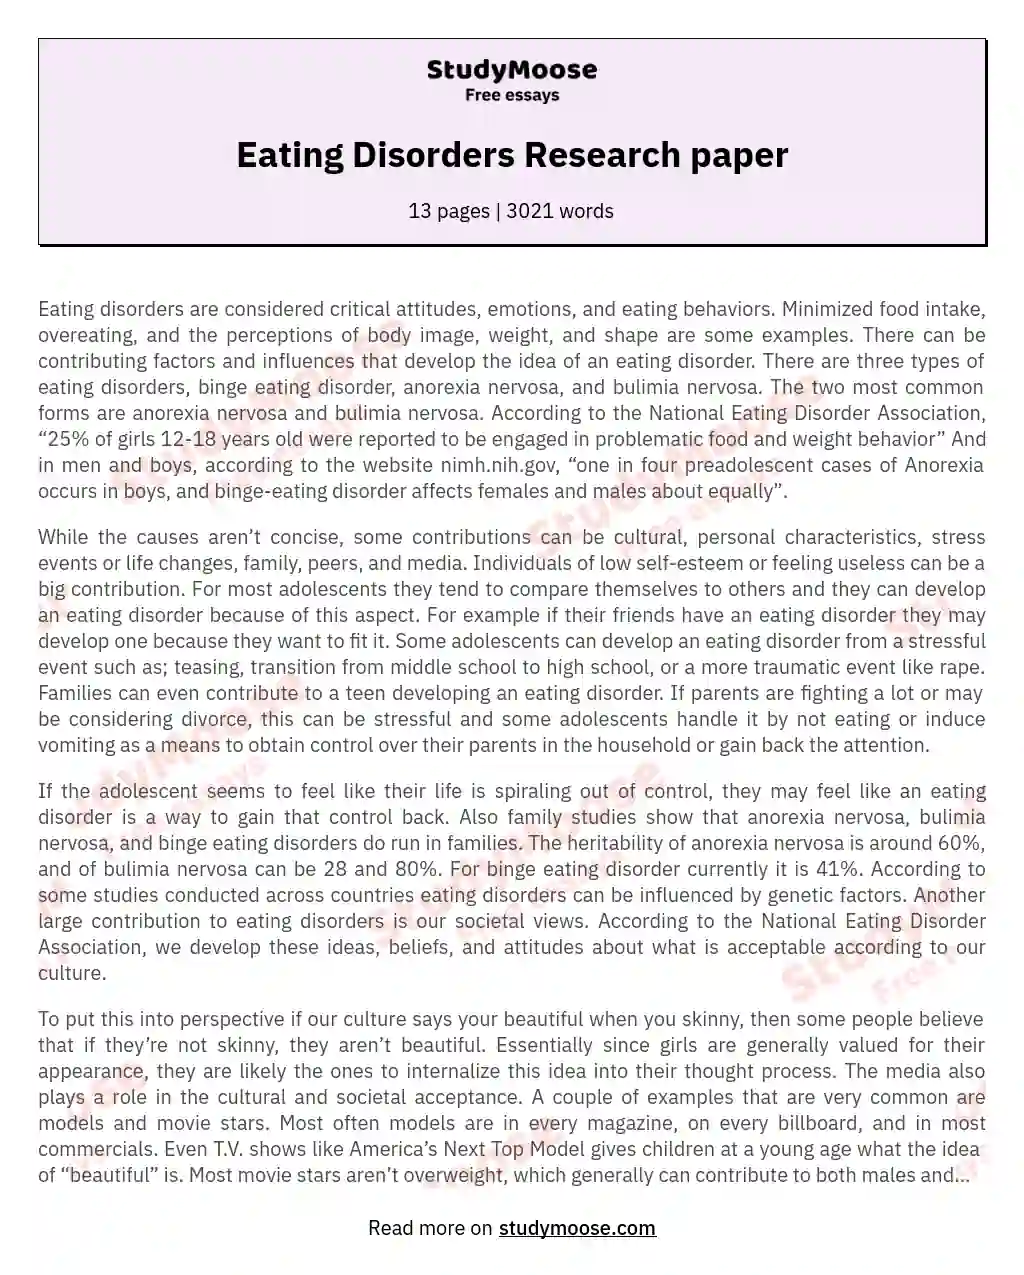 Eating Disorders Research paper